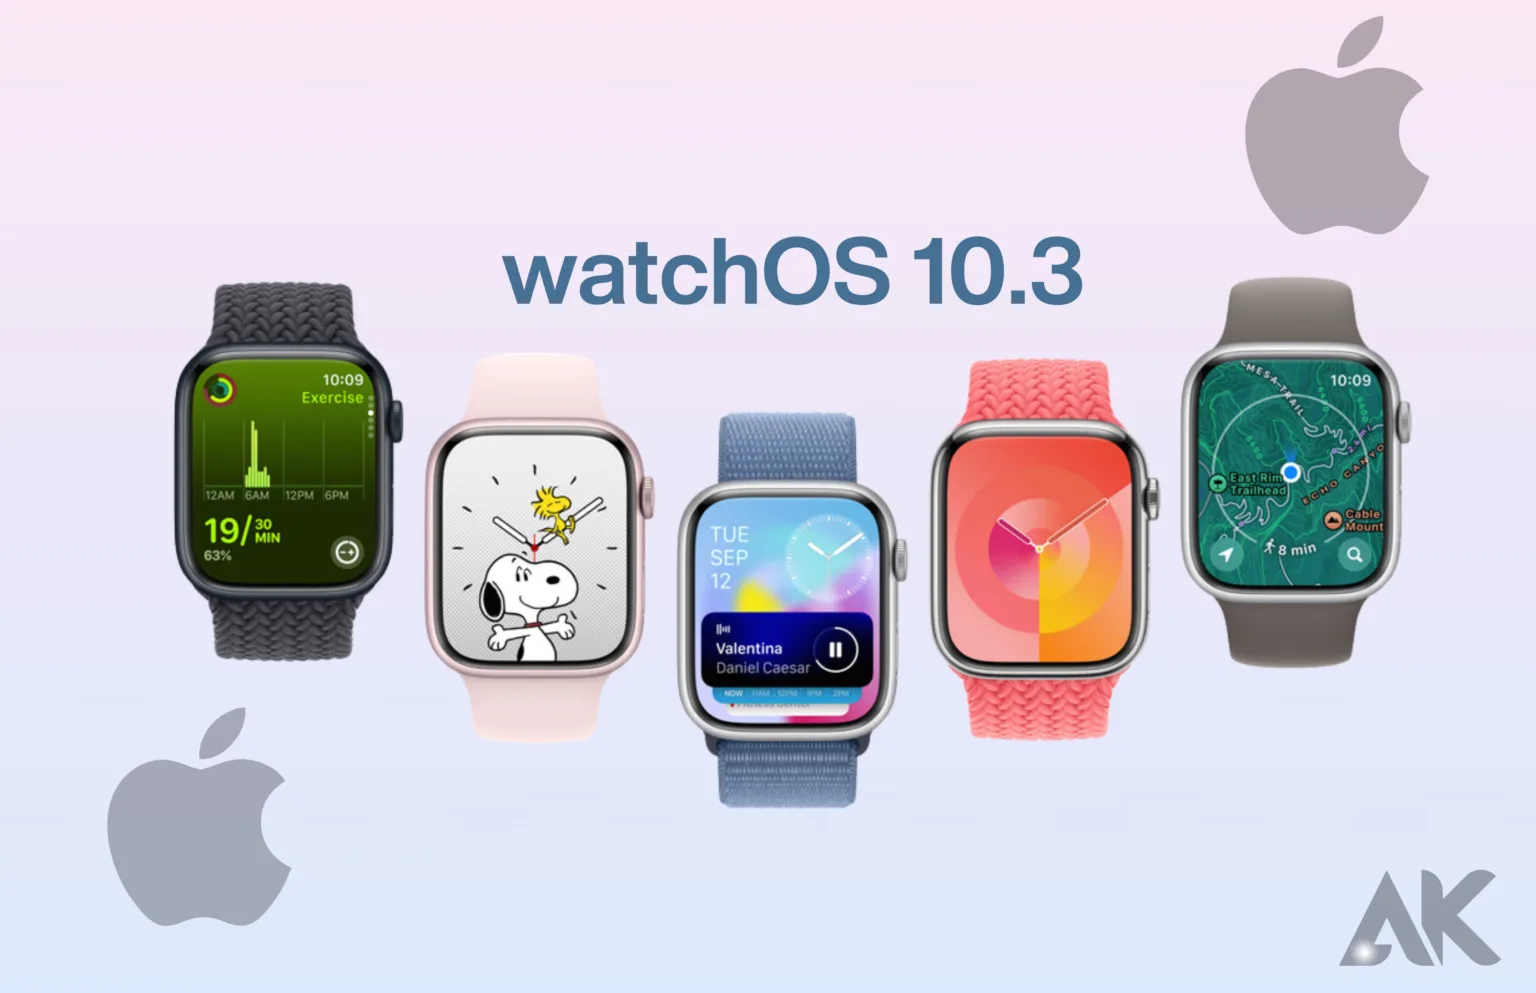 Tips and tricks for watchOS 10.3